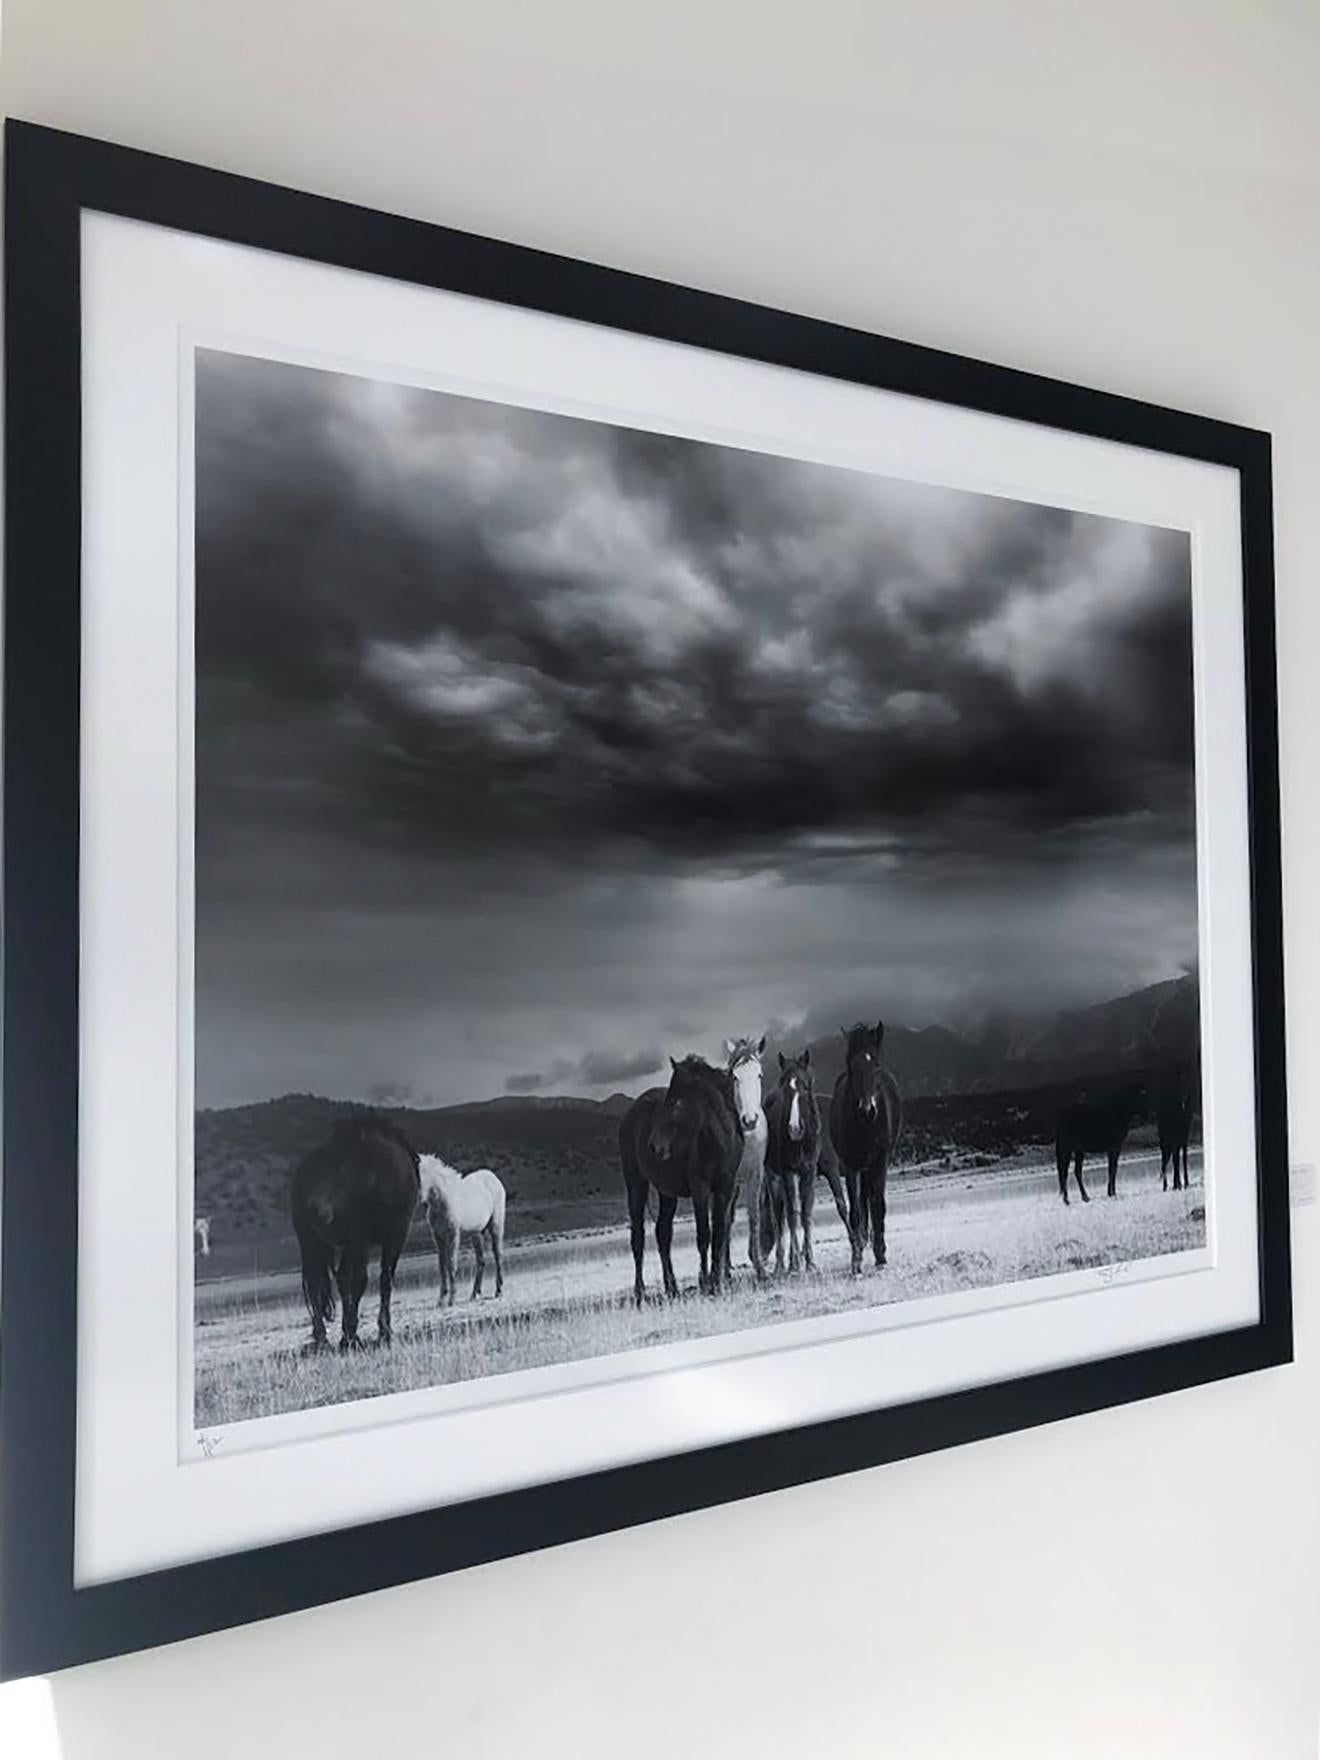 The Calm - Contemporary Black and White Photography of Wild Horses - Gray Landscape Photograph by Shane Russeck